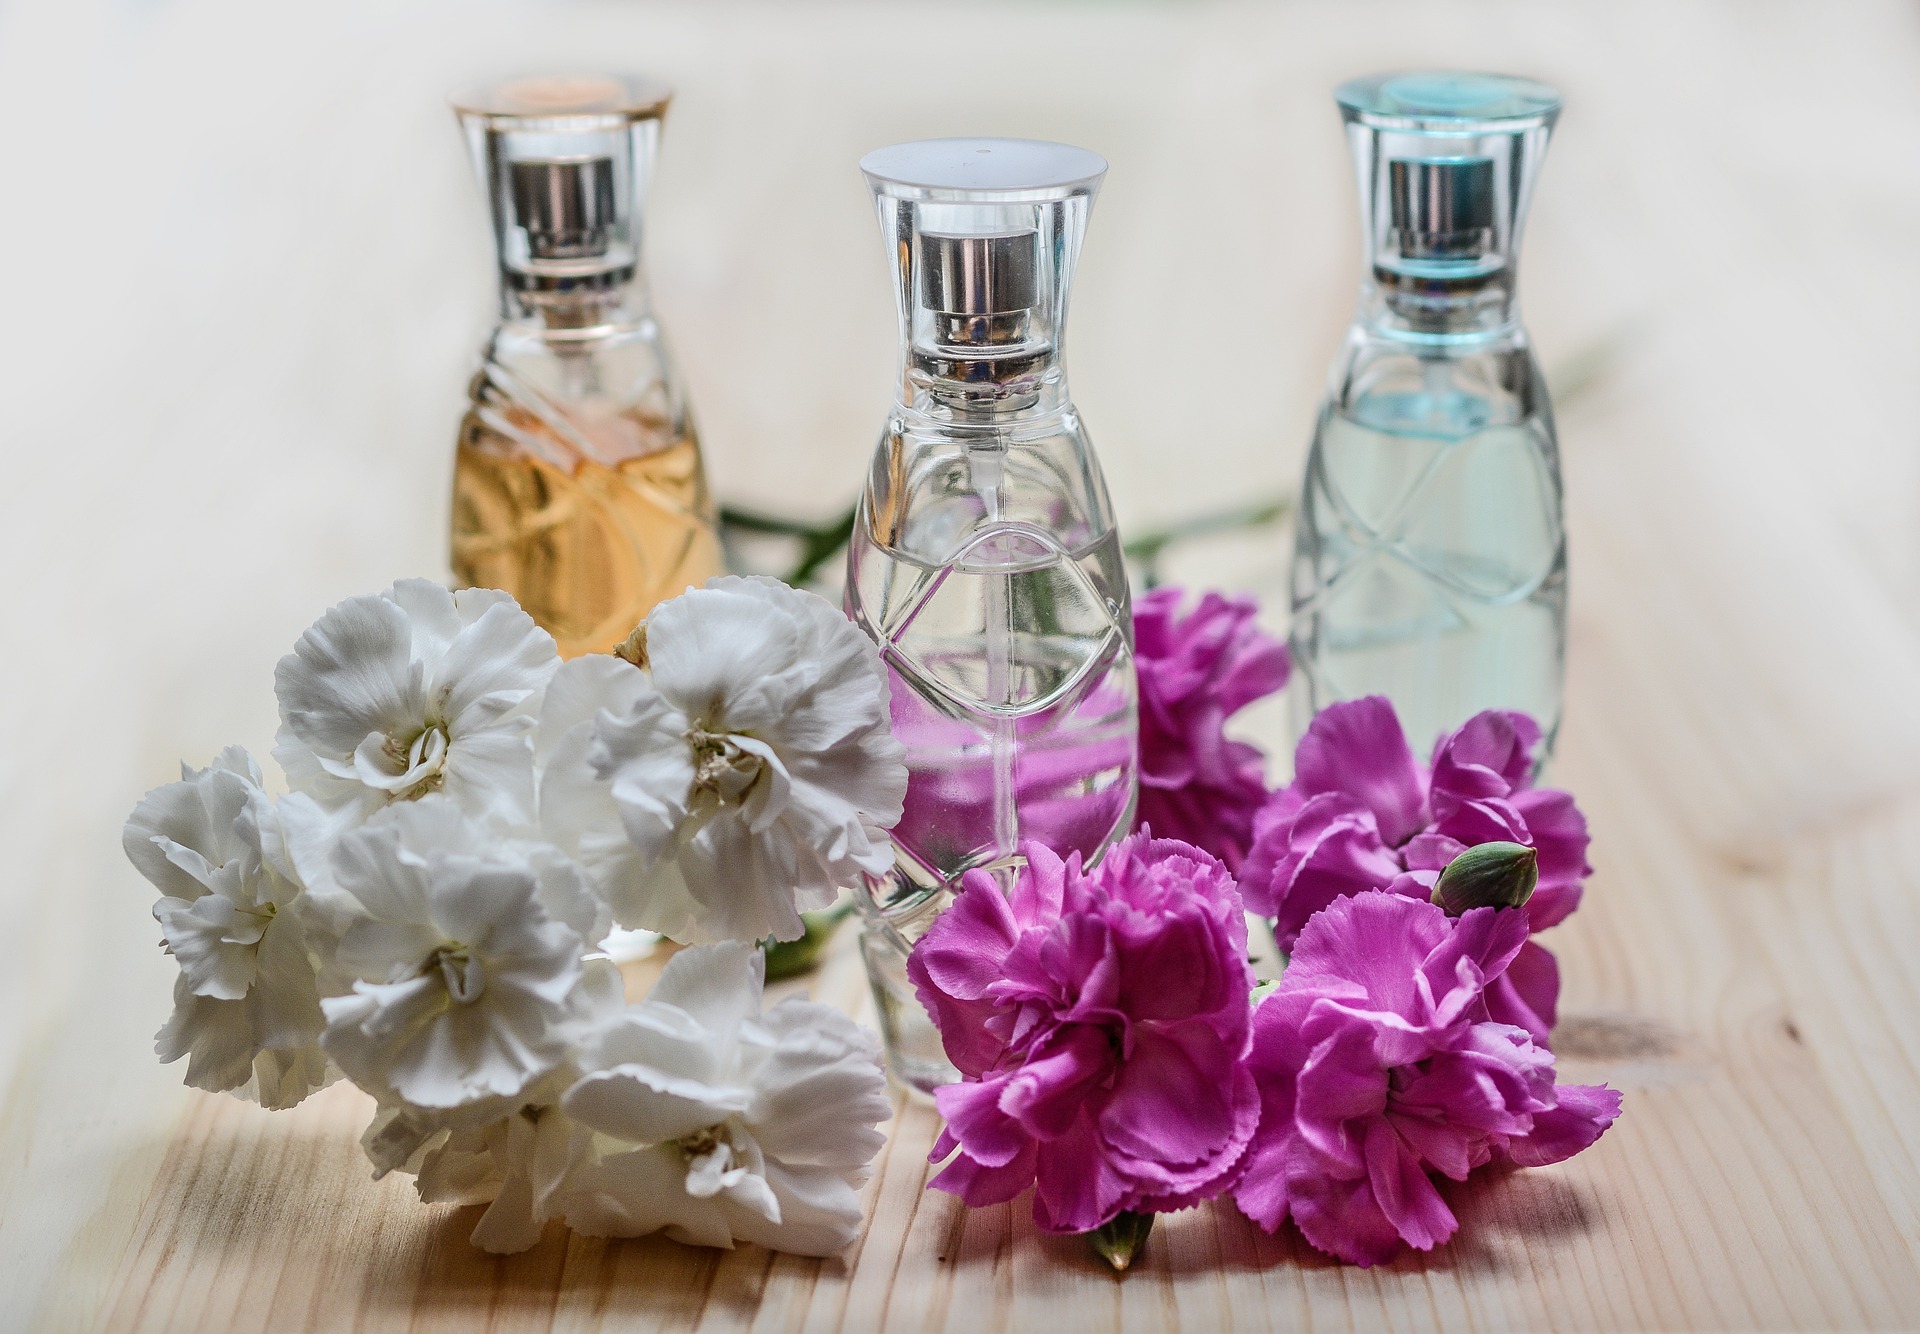 3 perfume bottles and flowers.